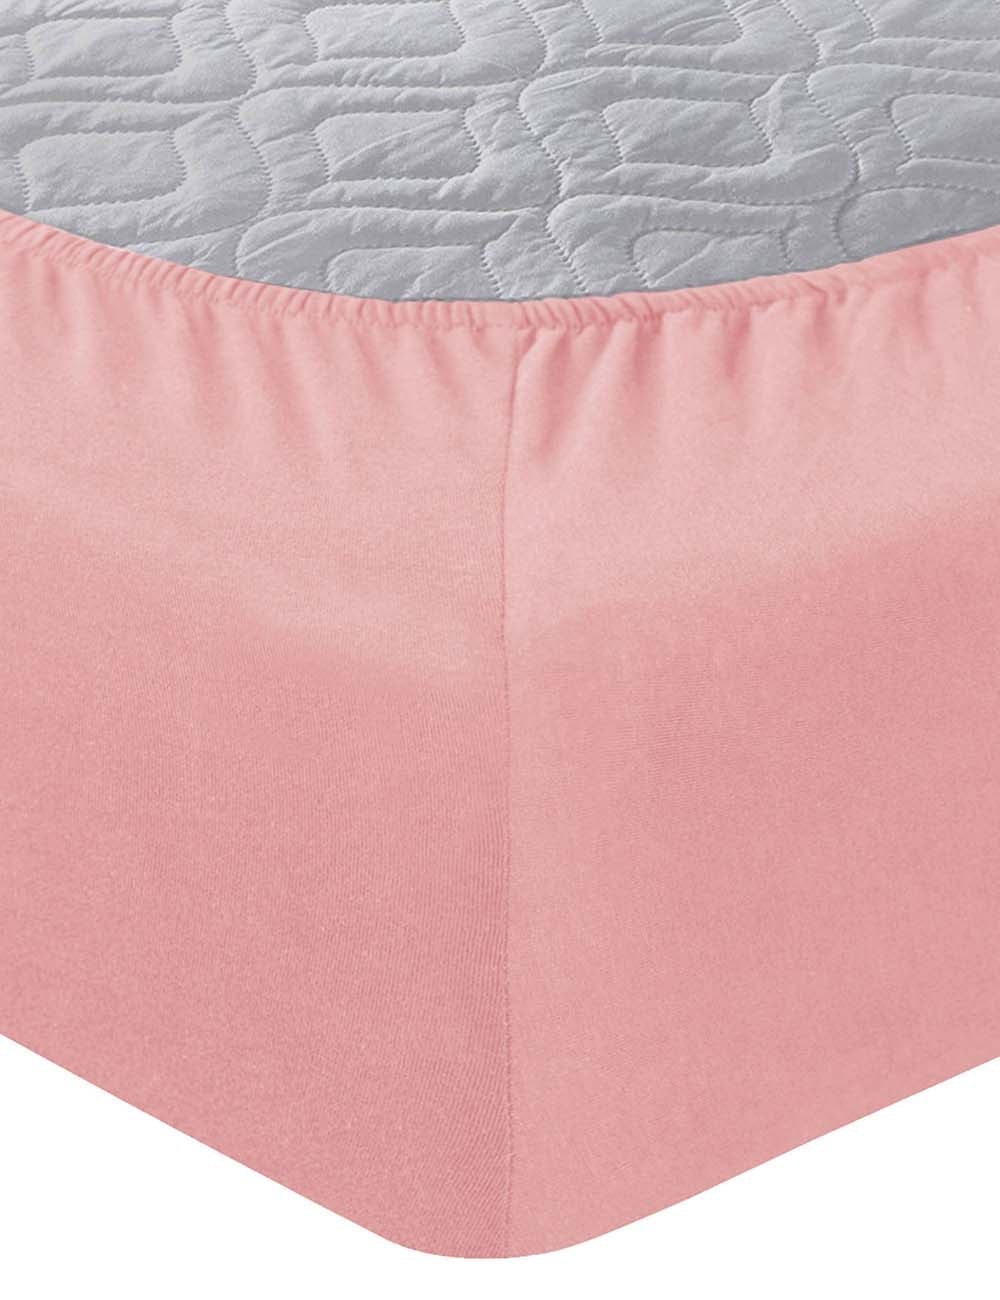 The Company Store Company Cotton Jersey Knit Waterproof Pink Cotton Queen Fitted Sheet